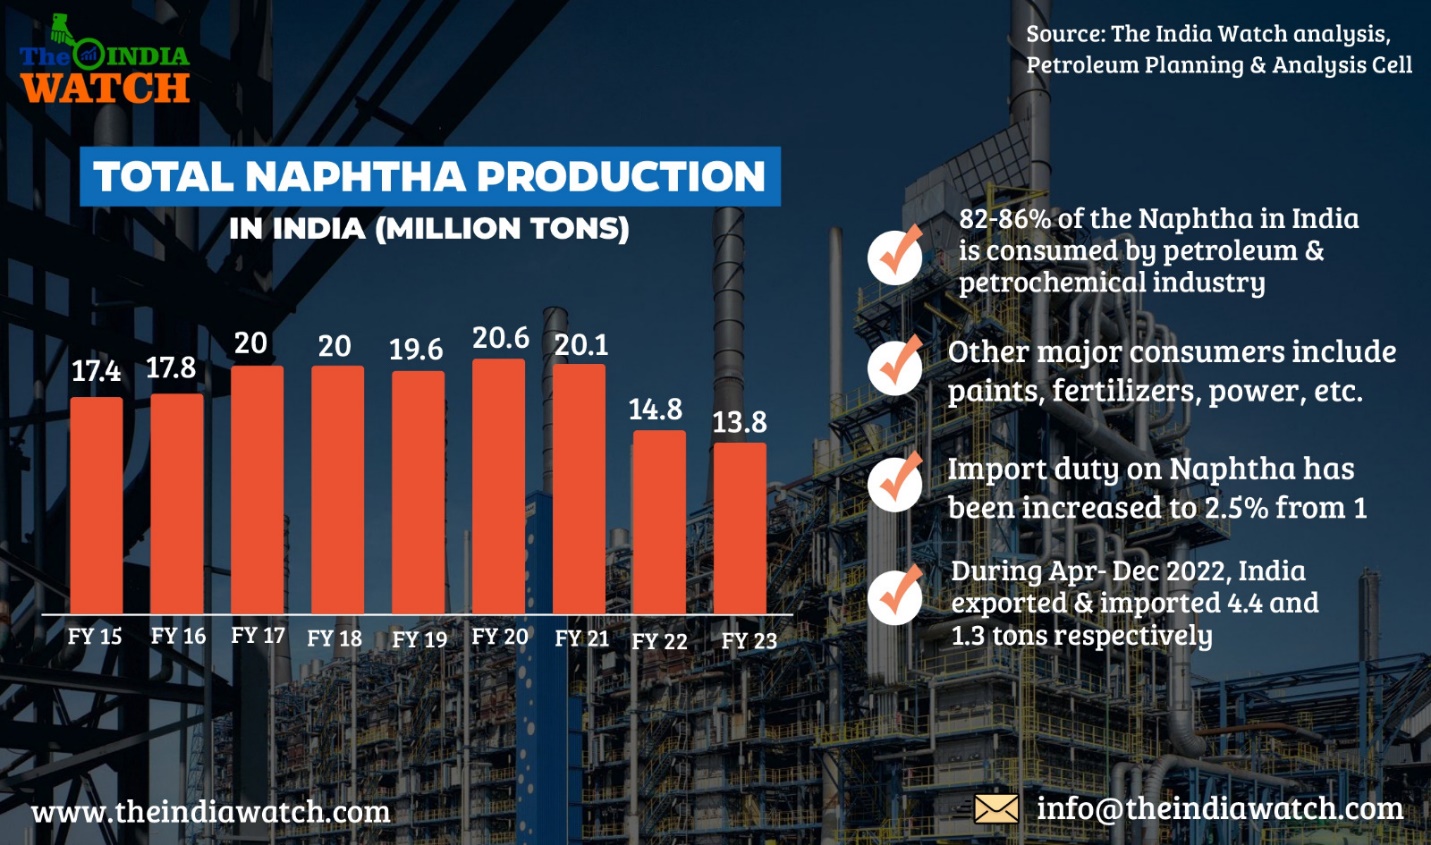 As Naphtha becomes a mainstream chemical, the market grows steadily